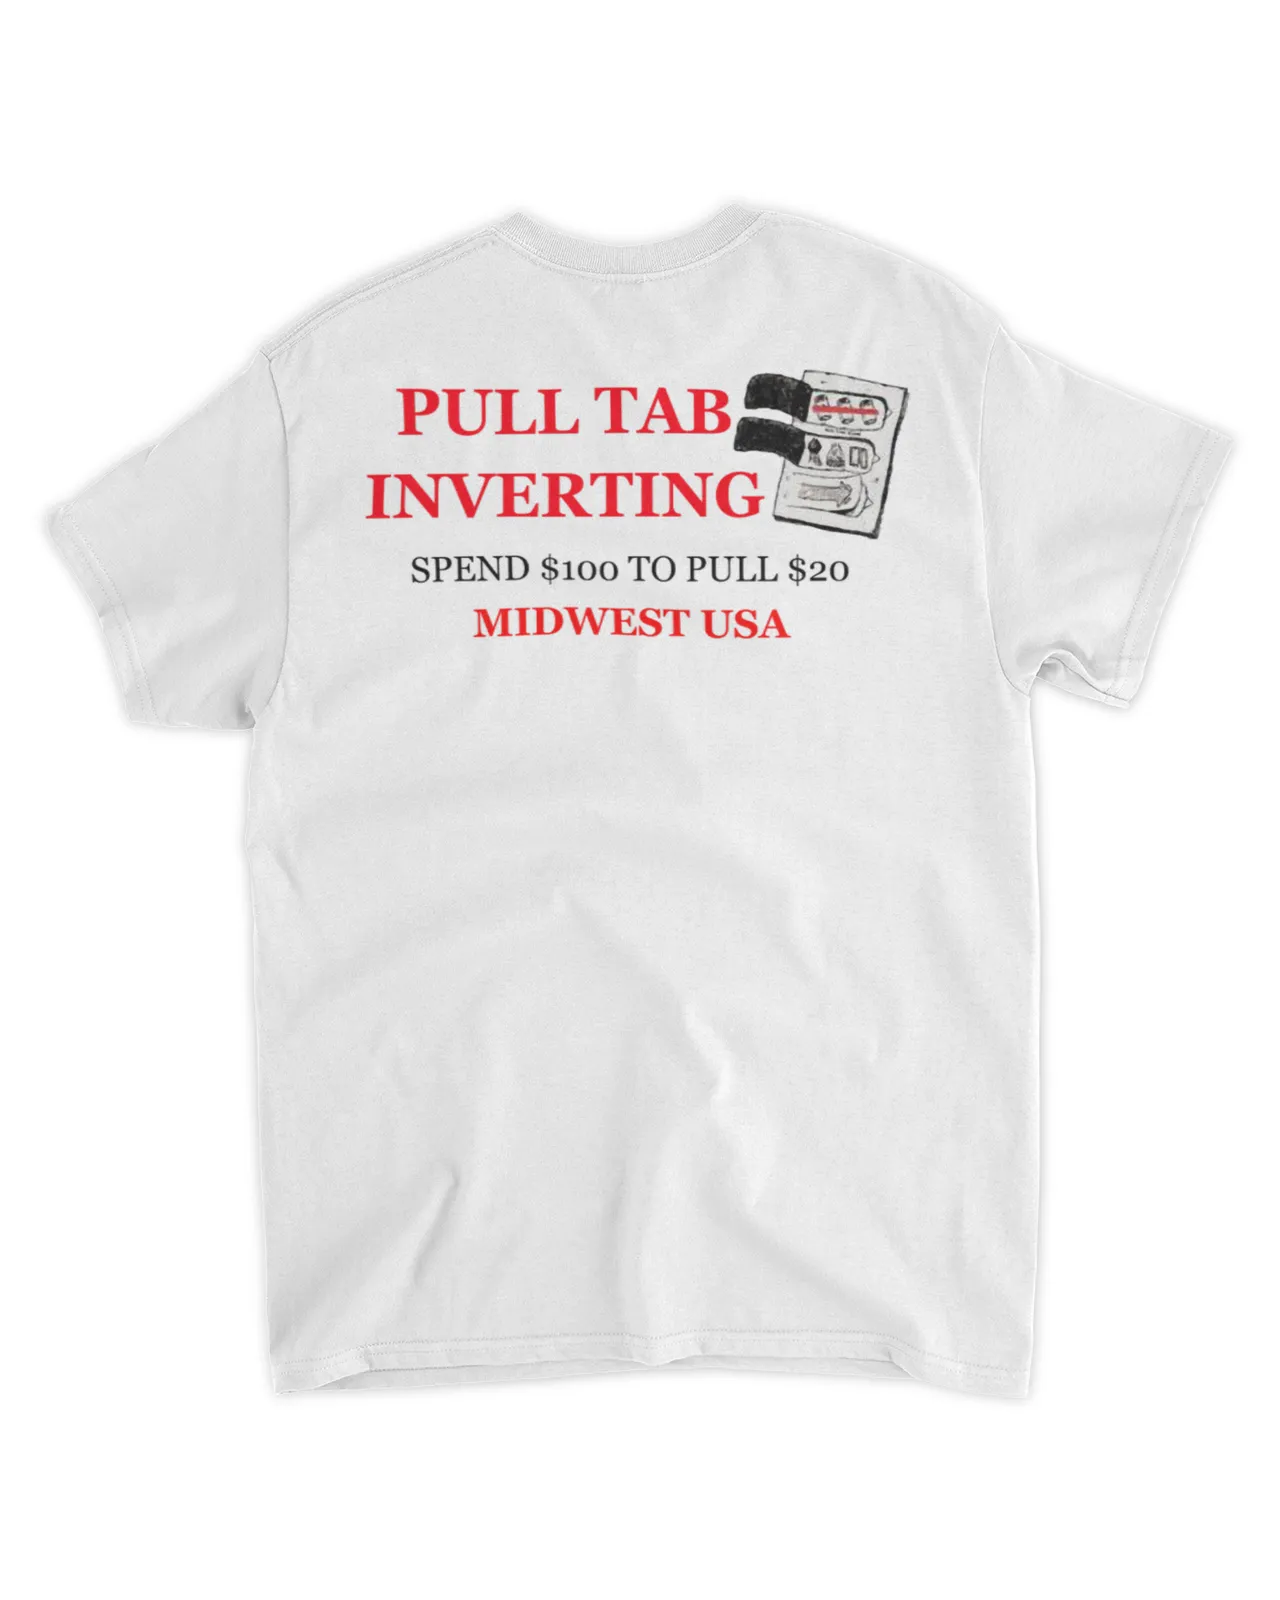  Pull tab investing spend 100 to pull 20 Midwest Usa shirt